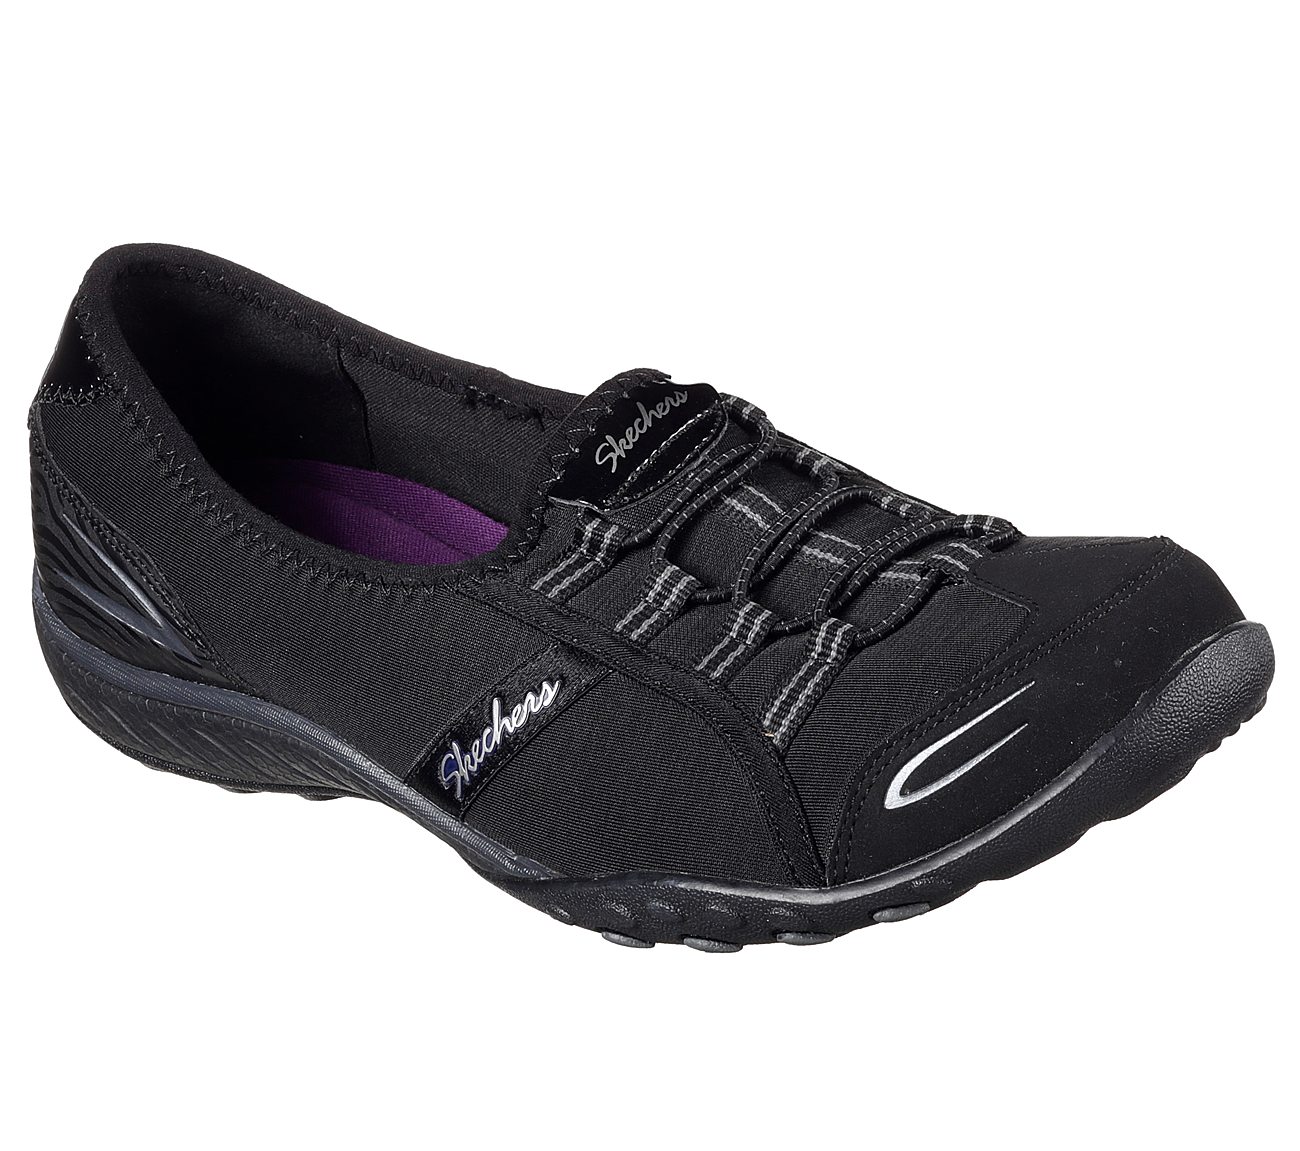 skechers relaxed fit mens pink